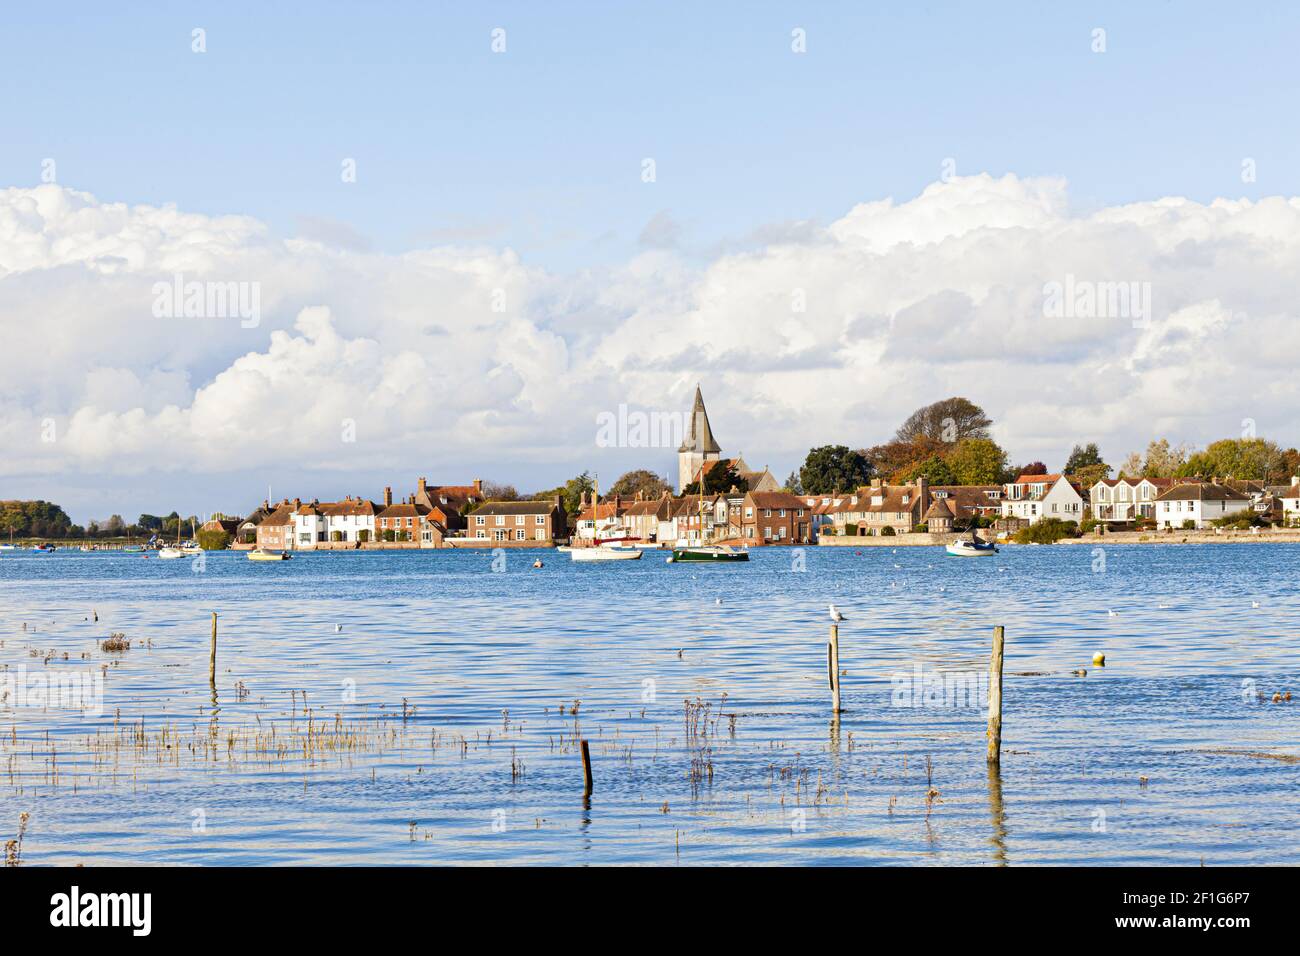 High tide at the village of Bosham, West Sussex UK. It is here that King Canute (Cnut) is reputed to have futilely instructed the tide to go back. Stock Photo